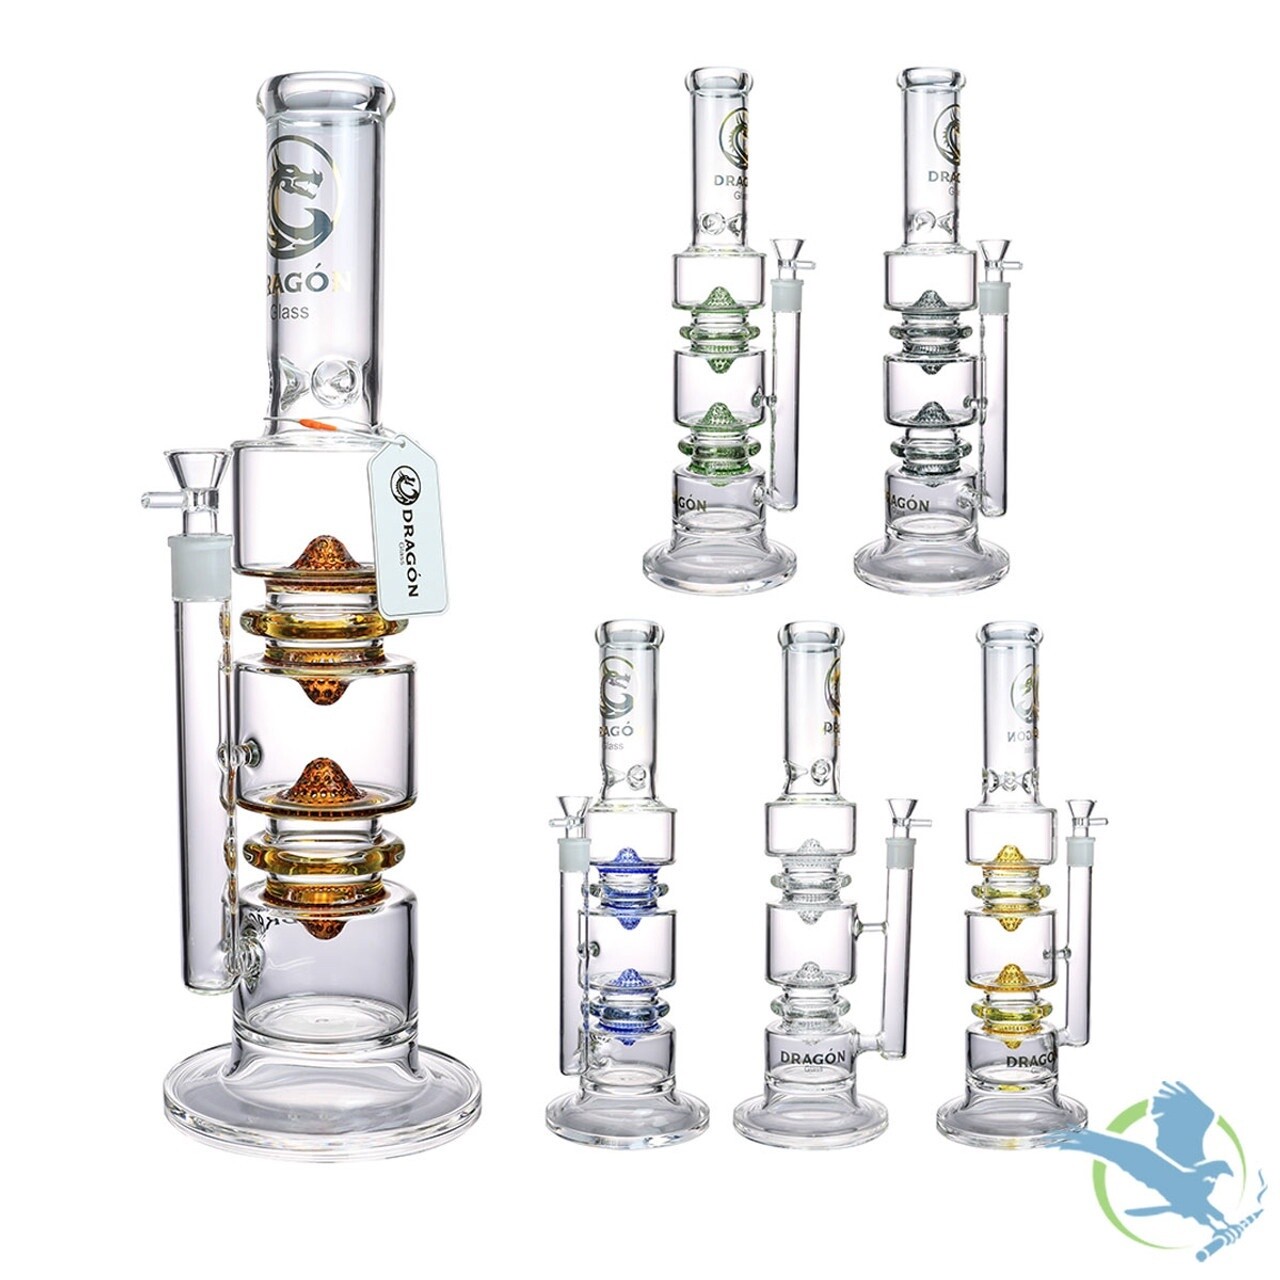 Dragon Glass Water Pipe Extruded Cylinder Design With Dual Honeycomb Percs- 18 Inches